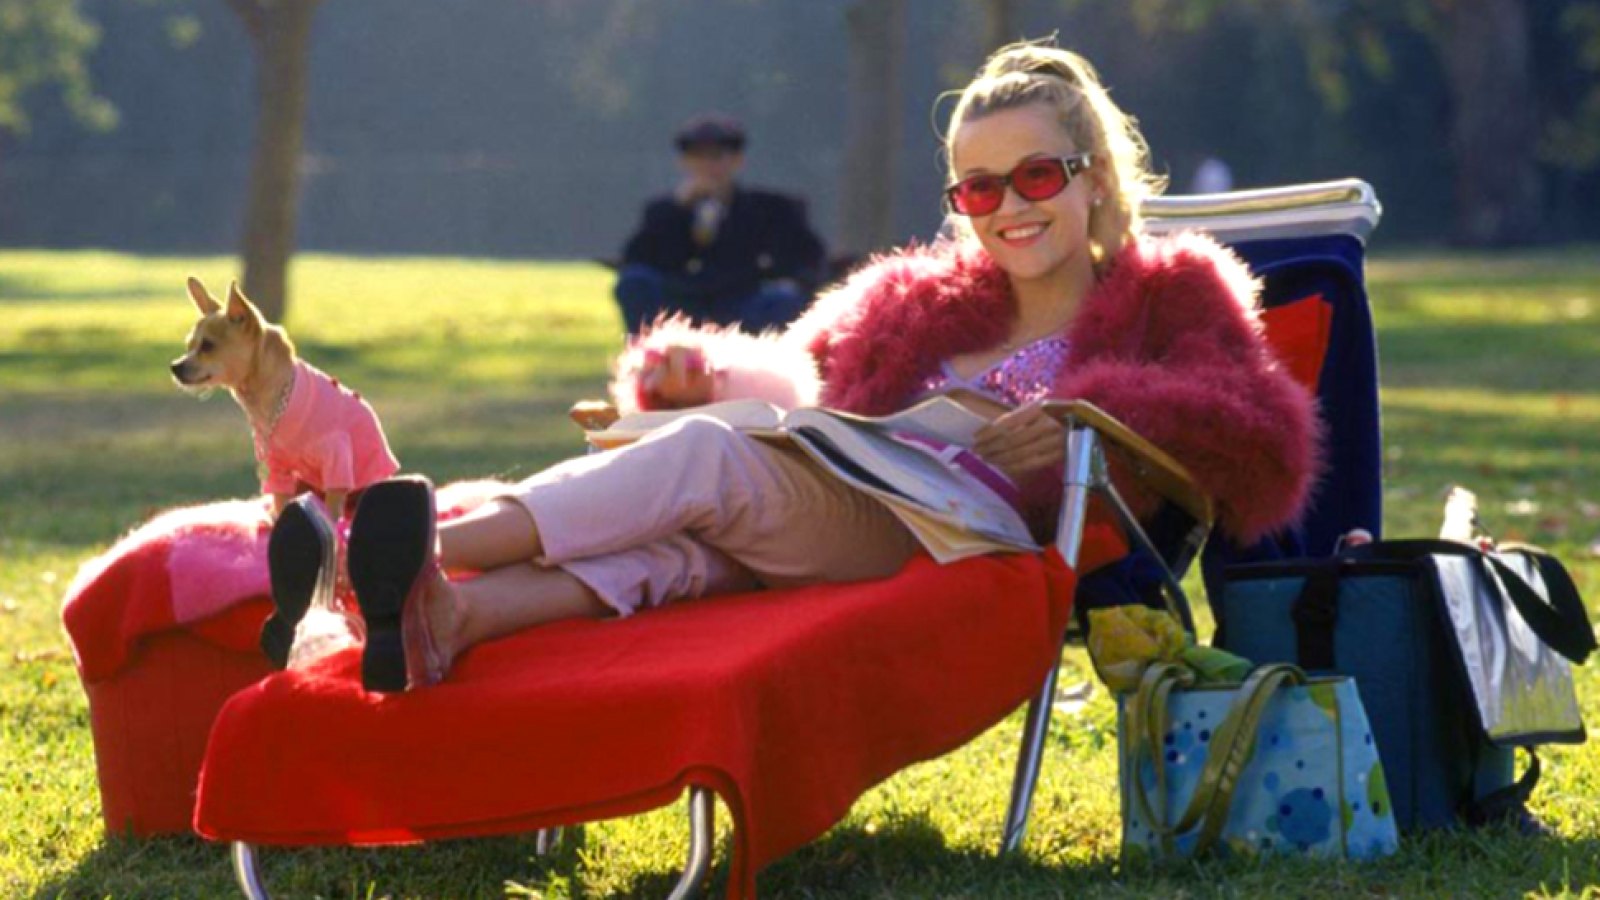 Reese Witherspoon as Elle Woods